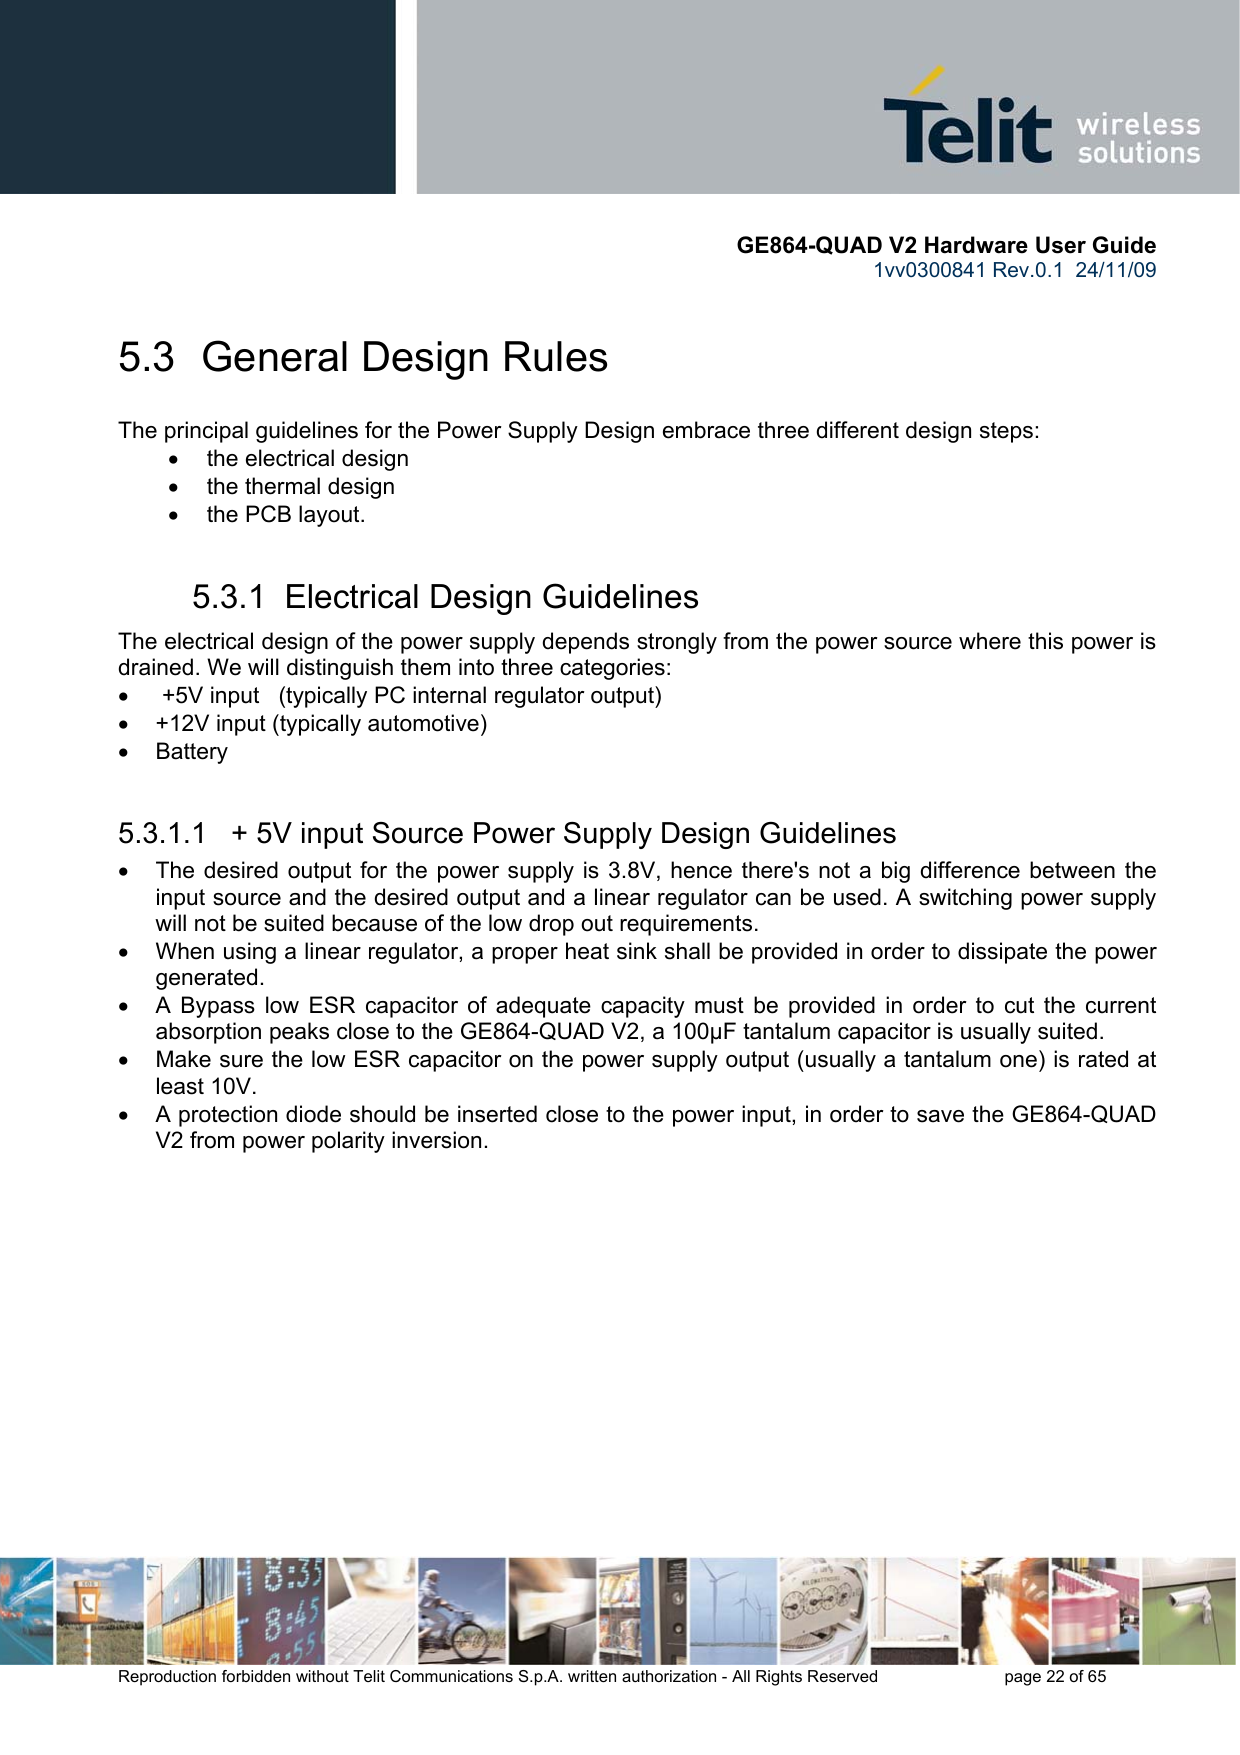       GE864-QUAD V2 Hardware User Guide 1vv0300841 Rev.0.1  24/11/09      Reproduction forbidden without Telit Communications S.p.A. written authorization - All Rights Reserved    page 22 of 65  5.3  General Design Rules The principal guidelines for the Power Supply Design embrace three different design steps: •  the electrical design •  the thermal design •  the PCB layout. 5.3.1  Electrical Design Guidelines The electrical design of the power supply depends strongly from the power source where this power is drained. We will distinguish them into three categories: •   +5V input   (typically PC internal regulator output) •  +12V input (typically automotive) • Battery  5.3.1.1   + 5V input Source Power Supply Design Guidelines •  The desired output for the power supply is 3.8V, hence there&apos;s not a big difference between the input source and the desired output and a linear regulator can be used. A switching power supply will not be suited because of the low drop out requirements. •  When using a linear regulator, a proper heat sink shall be provided in order to dissipate the power generated. •  A Bypass low ESR capacitor of adequate capacity must be provided in order to cut the current absorption peaks close to the GE864-QUAD V2, a 100μF tantalum capacitor is usually suited. •  Make sure the low ESR capacitor on the power supply output (usually a tantalum one) is rated at least 10V. •  A protection diode should be inserted close to the power input, in order to save the GE864-QUAD V2 from power polarity inversion. 